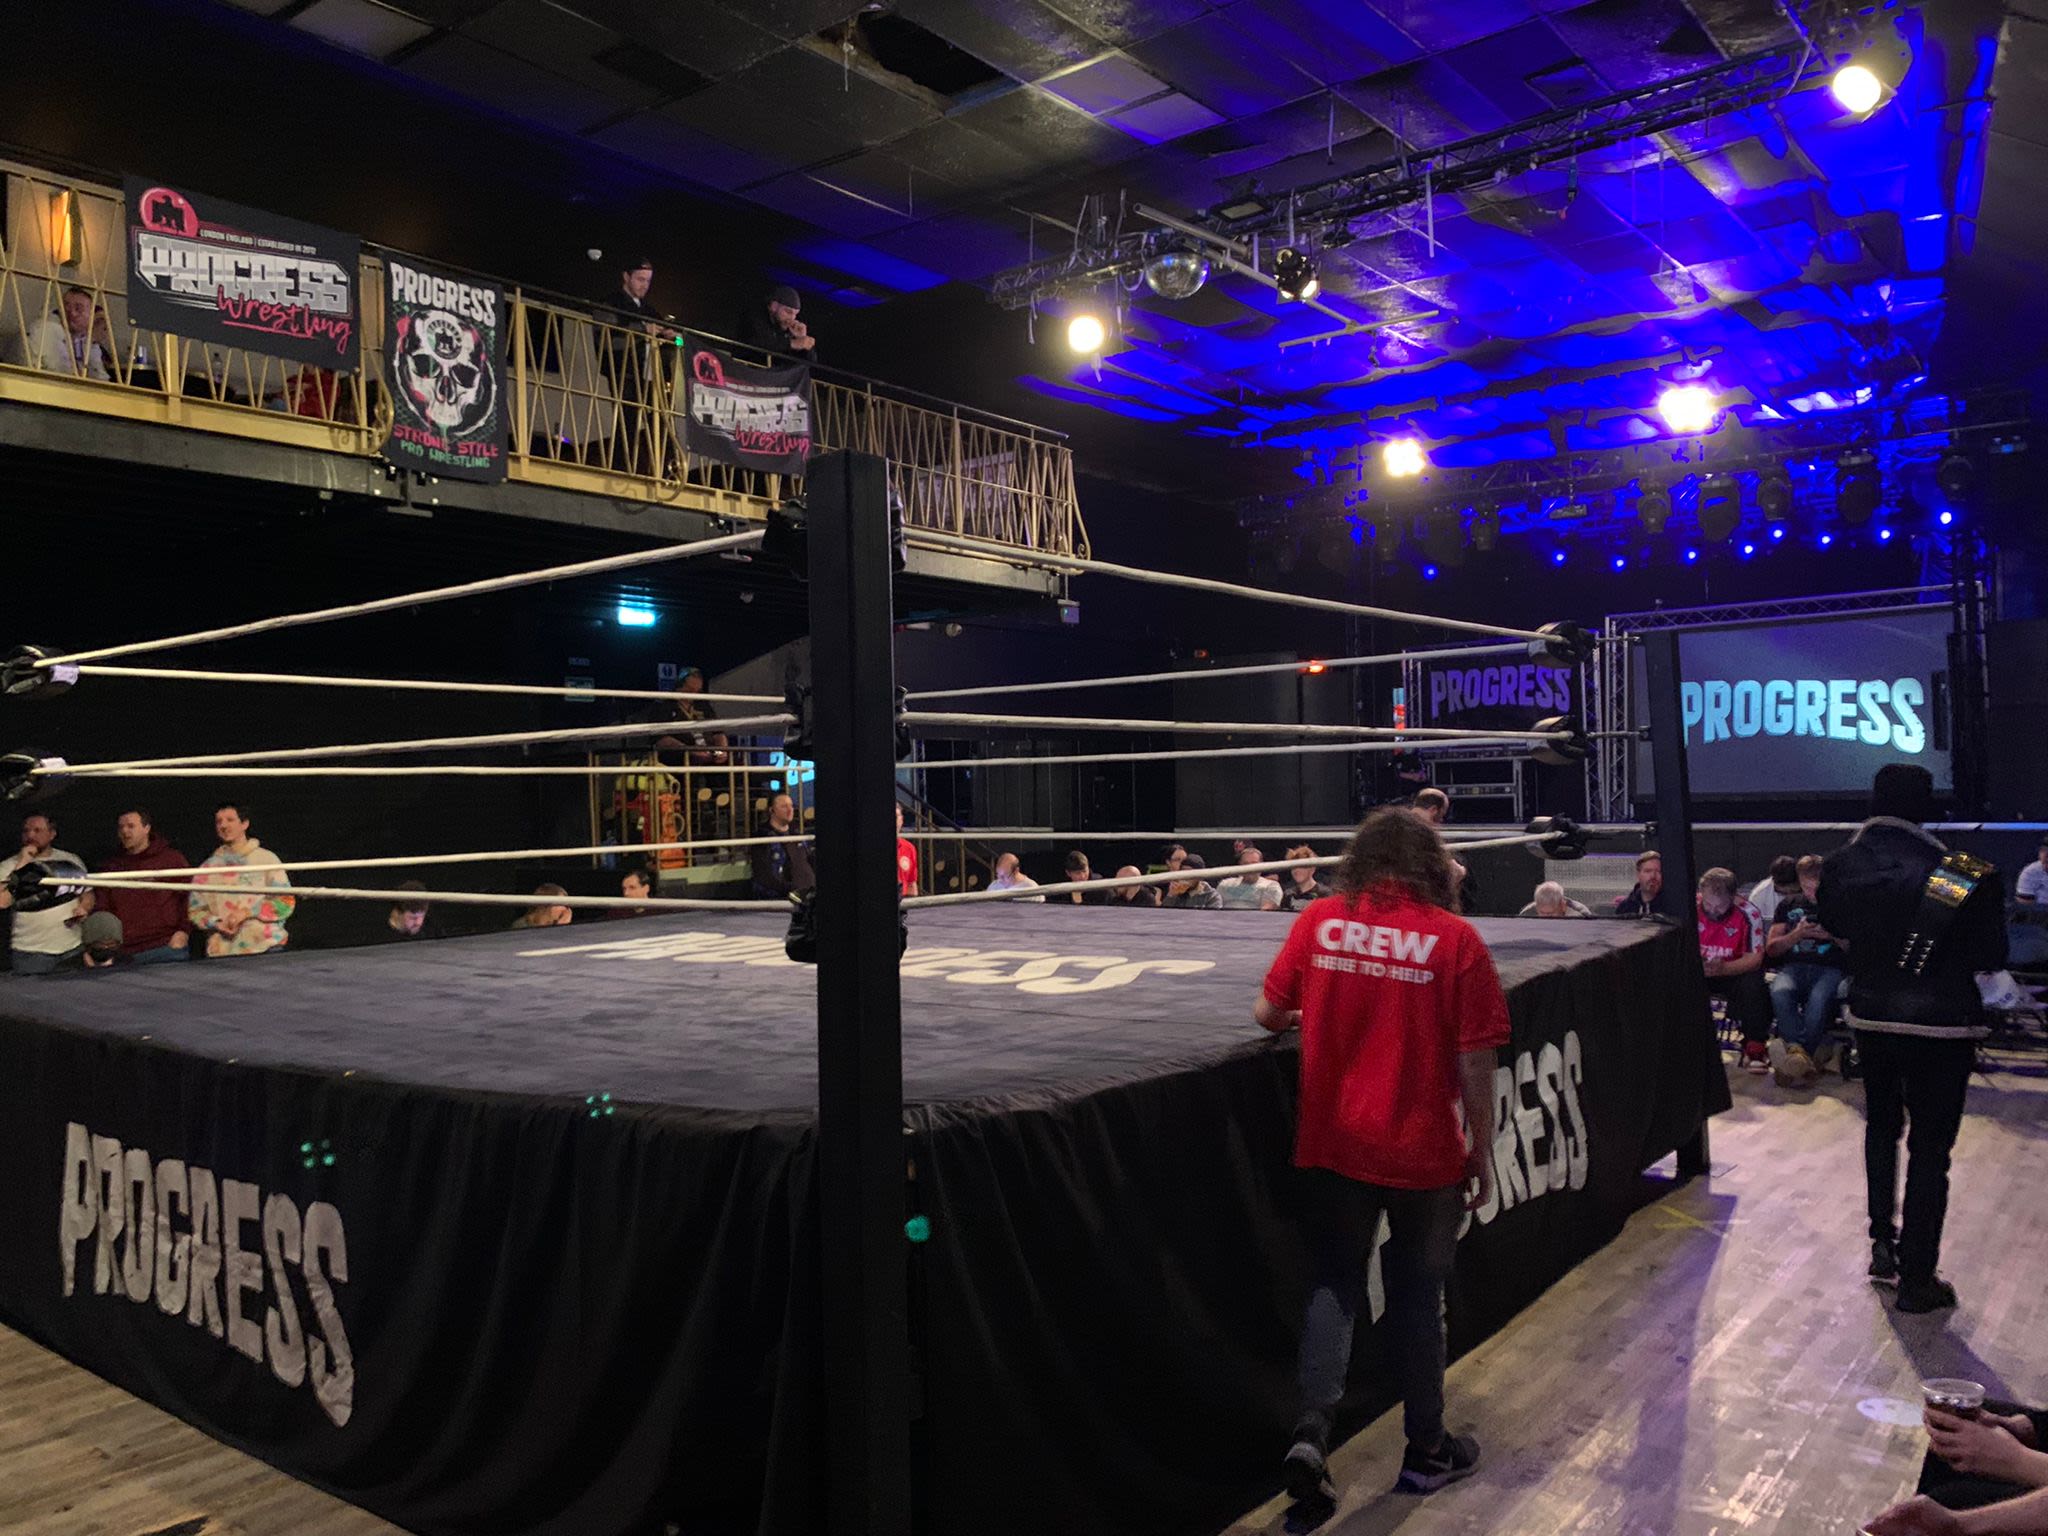 A ring used by Progress Wrestling 